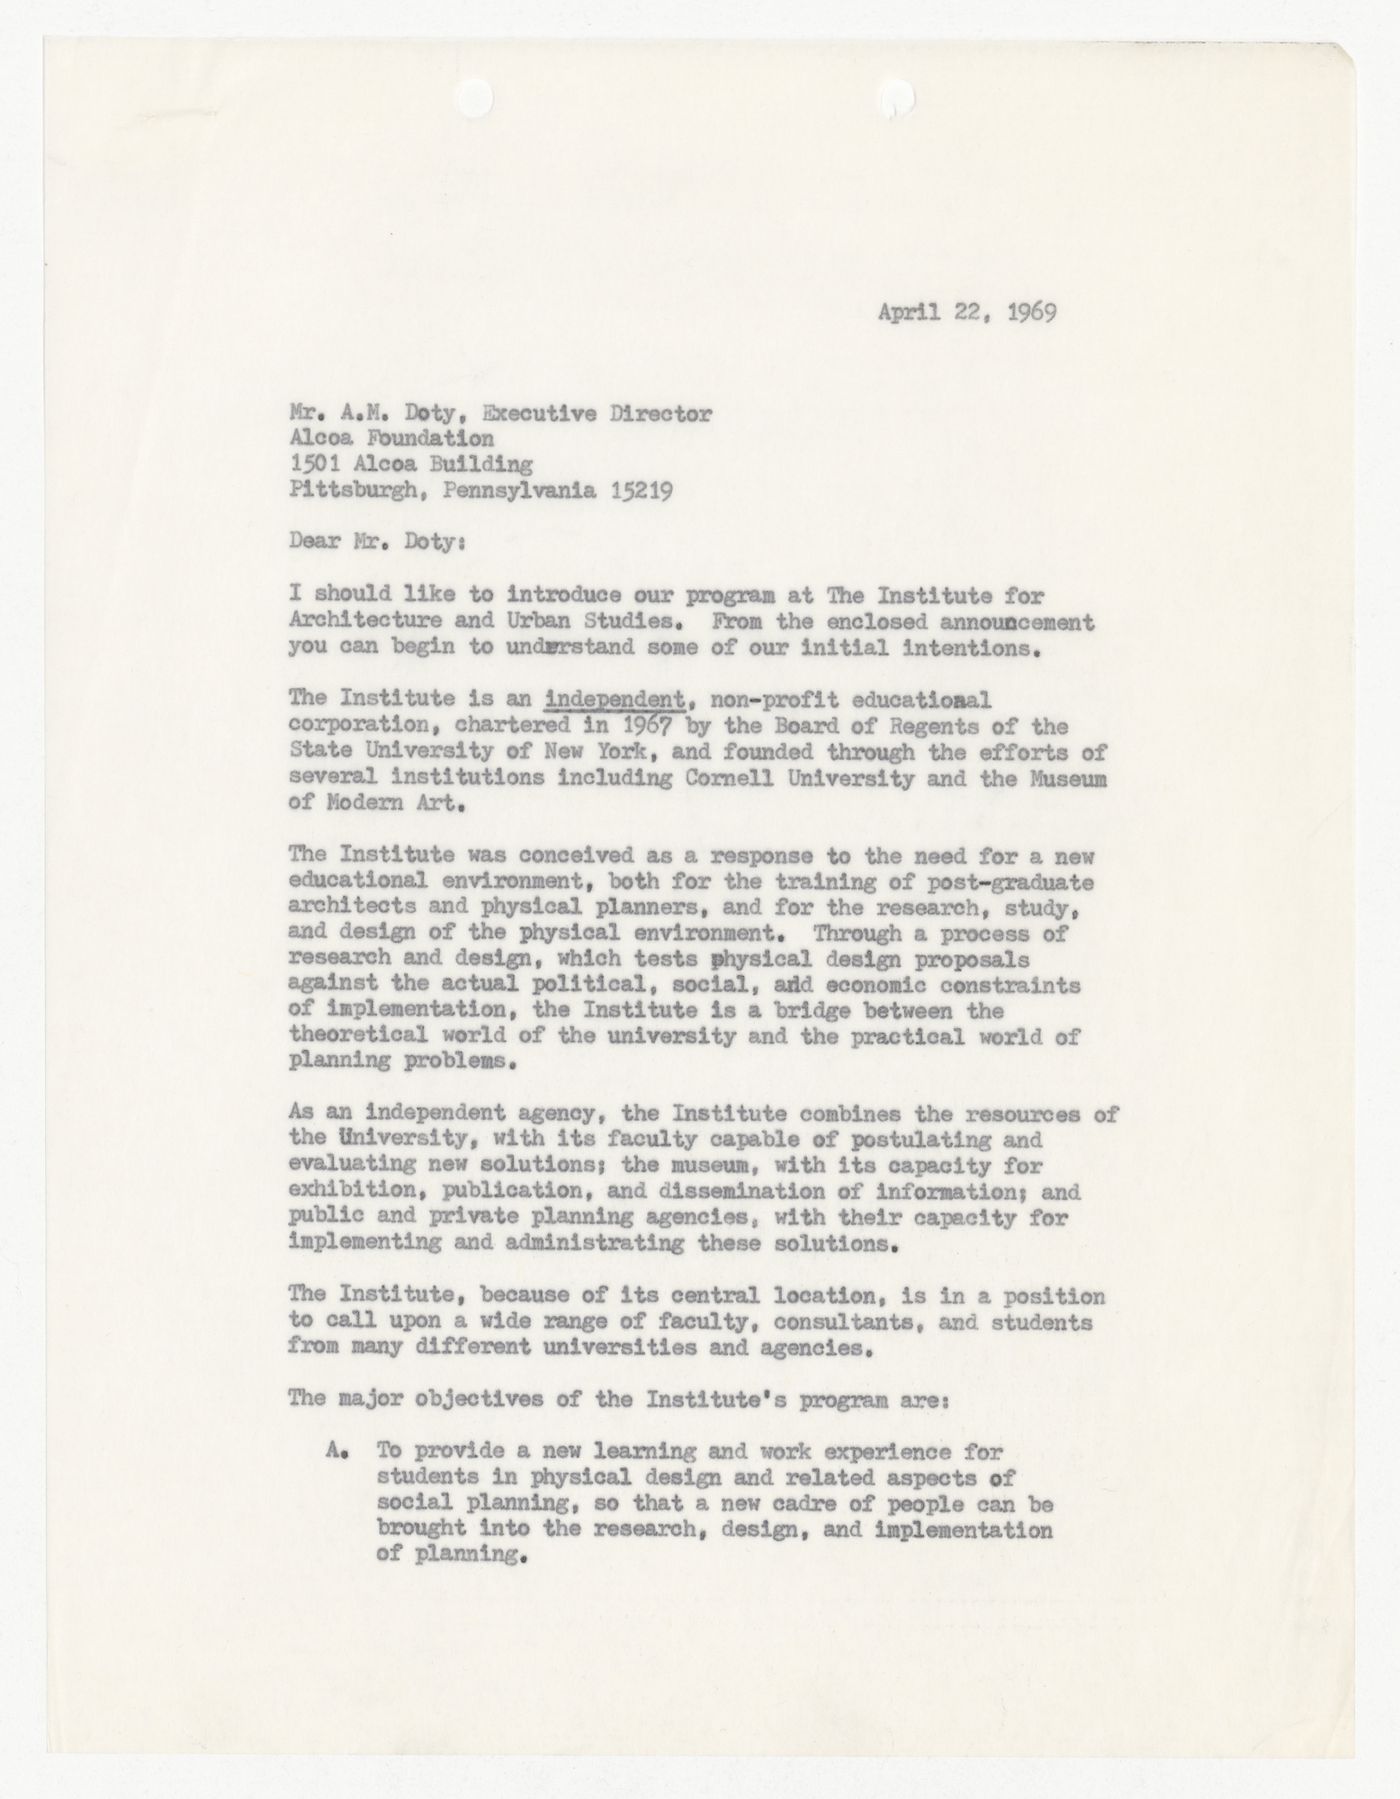 Letter from Peter D. Eisenman to Arthur M. Doty requesting a donation including a brief overview of IAUS history and projects